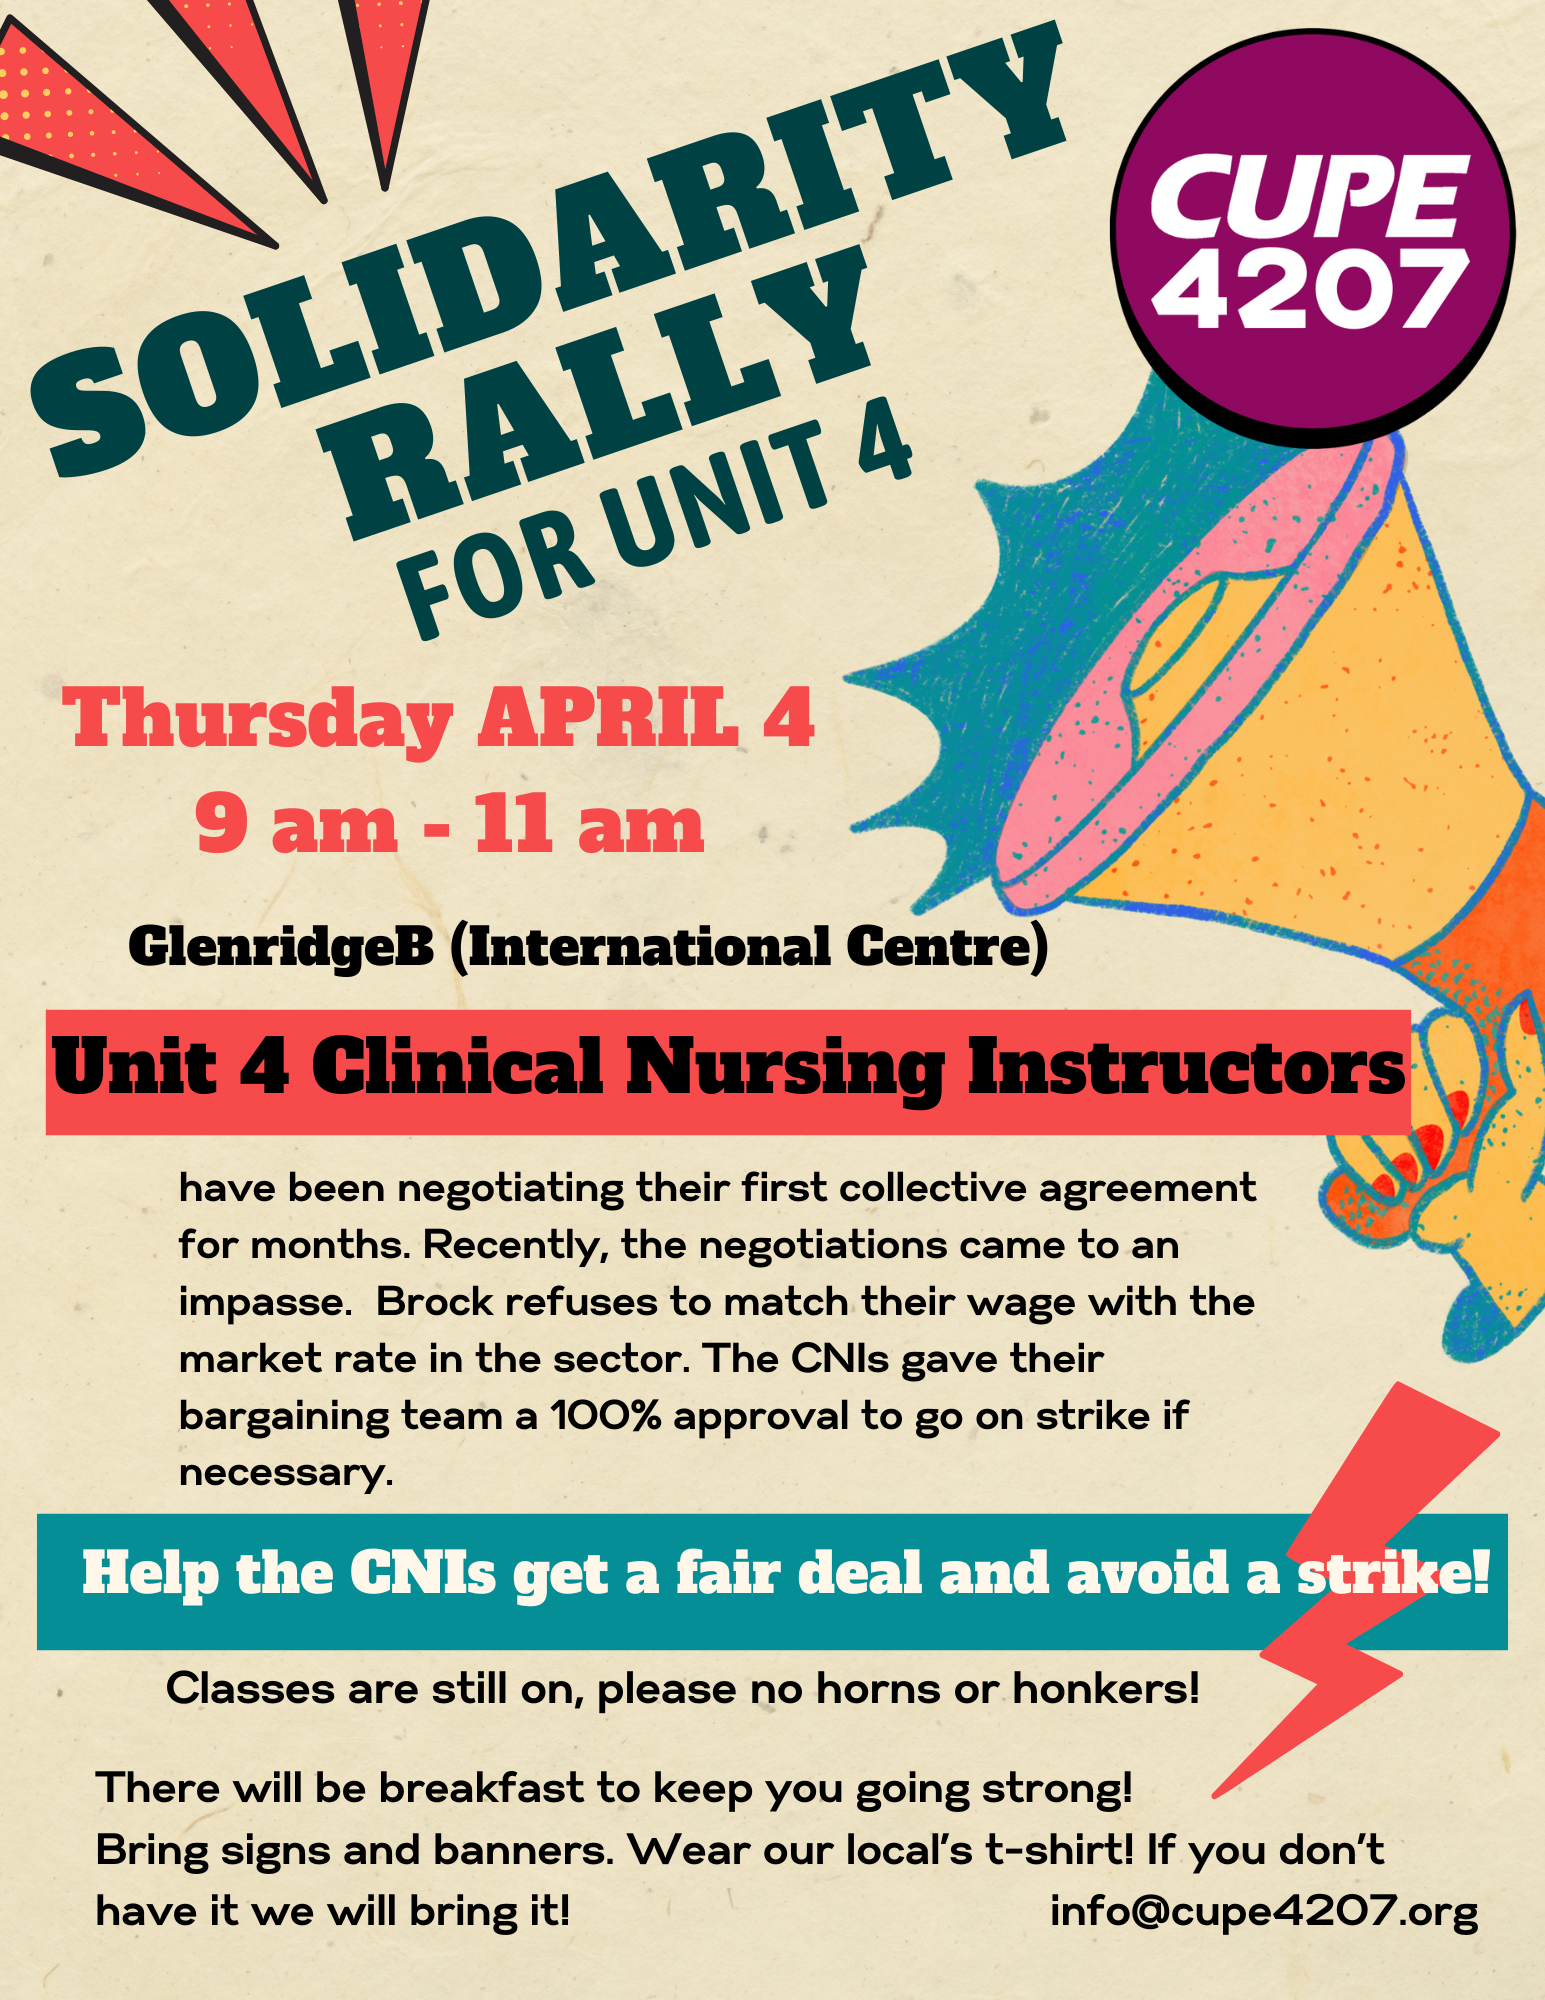 Solidarity Rally for CUPE 4207 Unit 4 @ Brock University International Centre